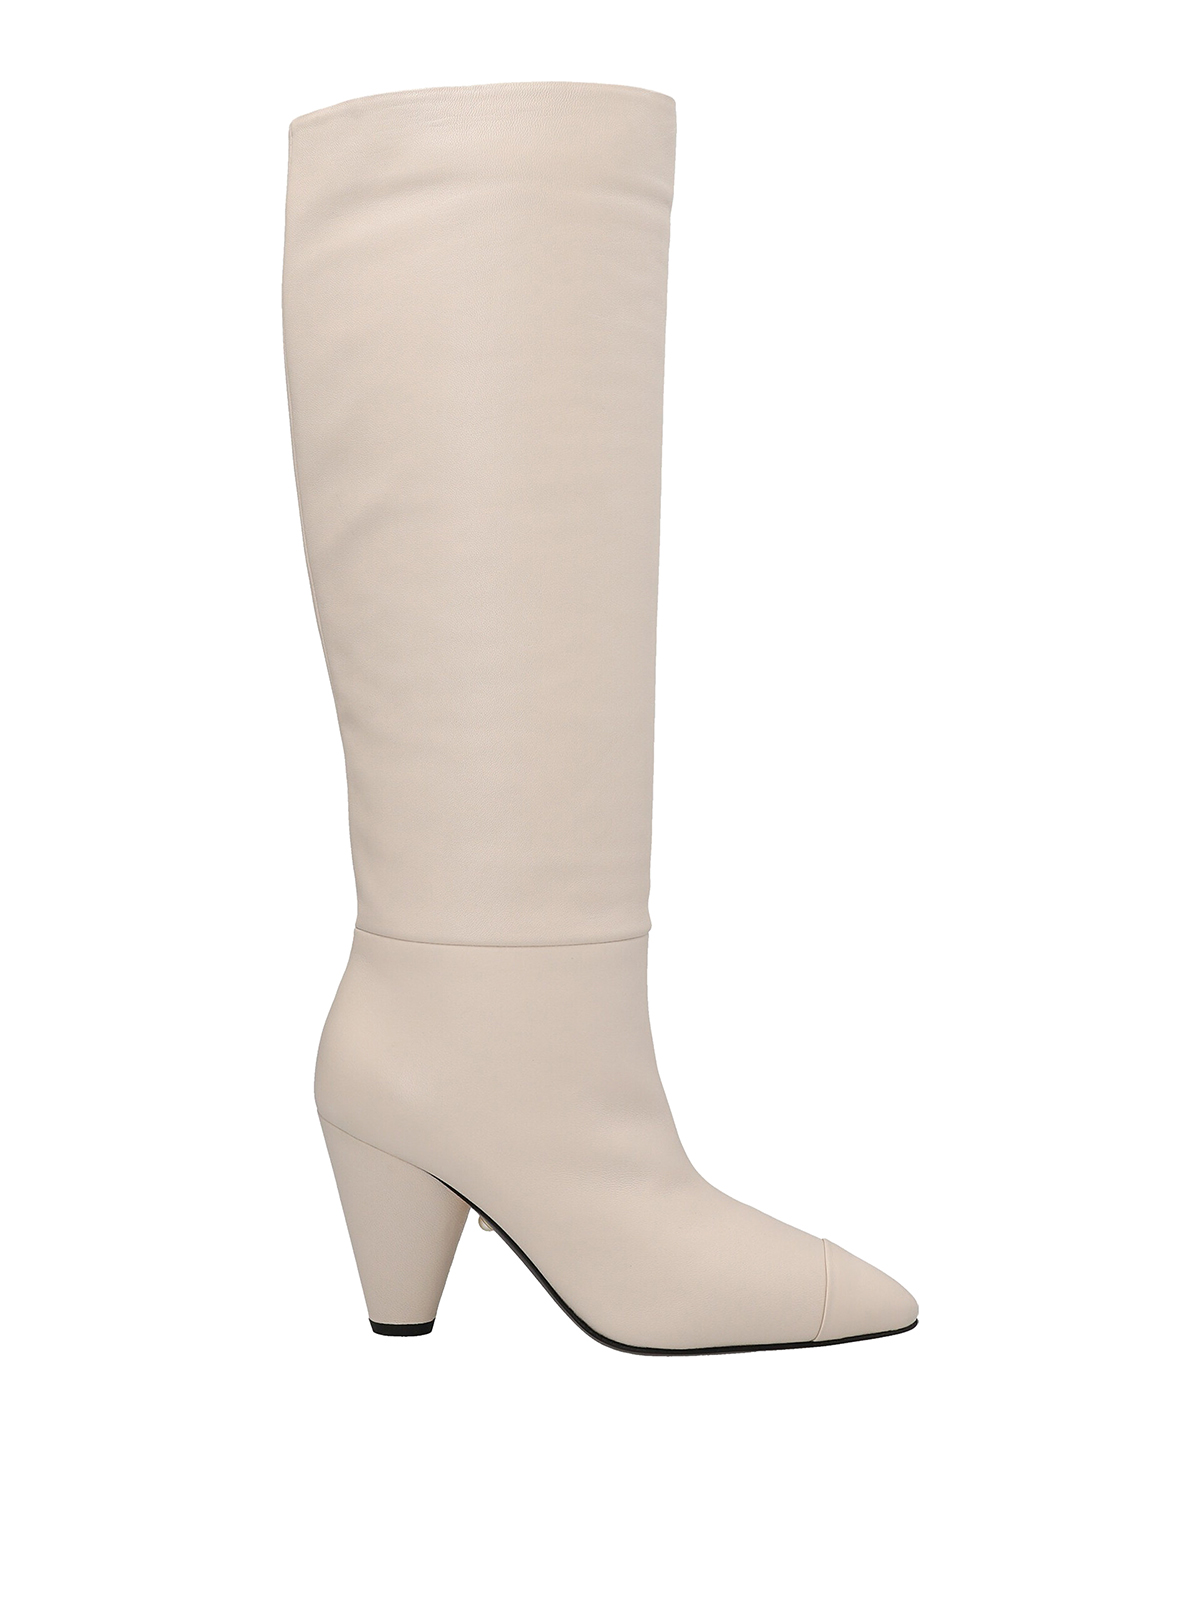 Alevì Milano Aleví Milano Woman Boot Cream Size 6 Soft Leather In Blanco